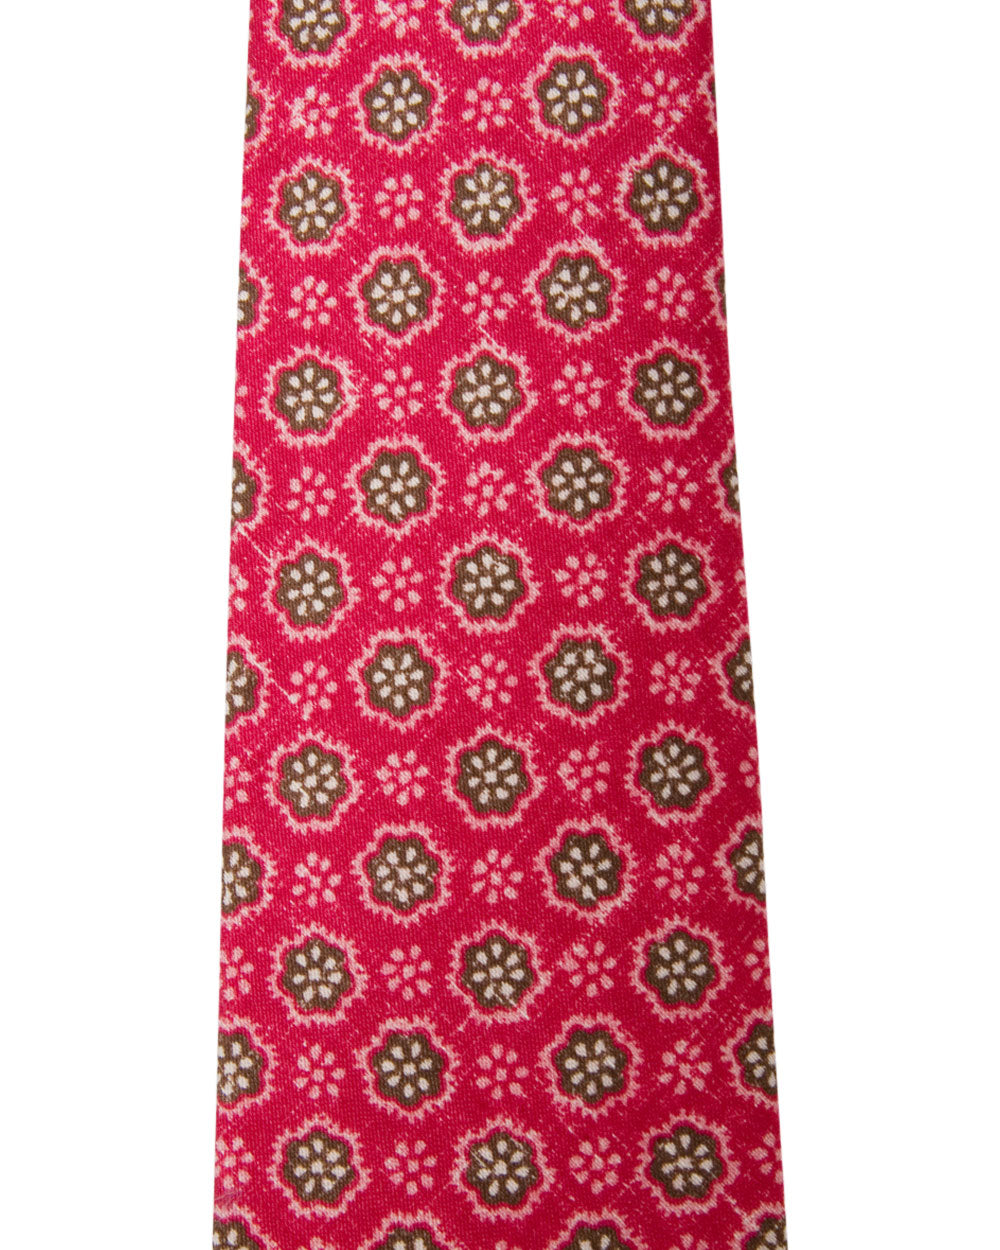 Berry and Brown Floral Tie